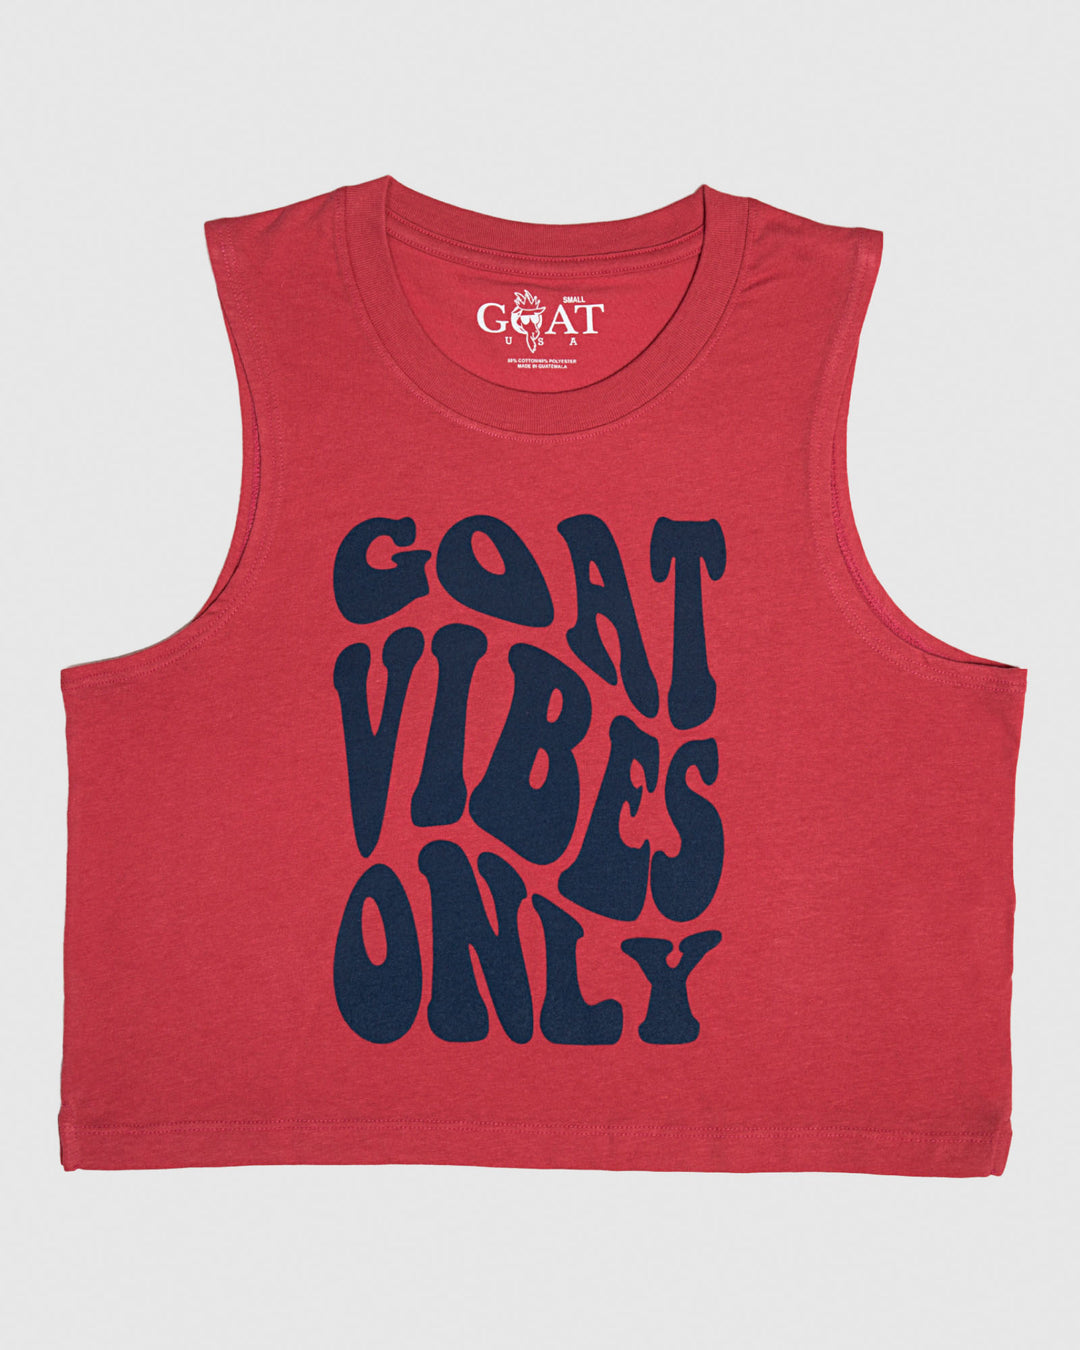 Red tank top with blue text that reads "GOAT VIBES ONLY"#color_sedona-red